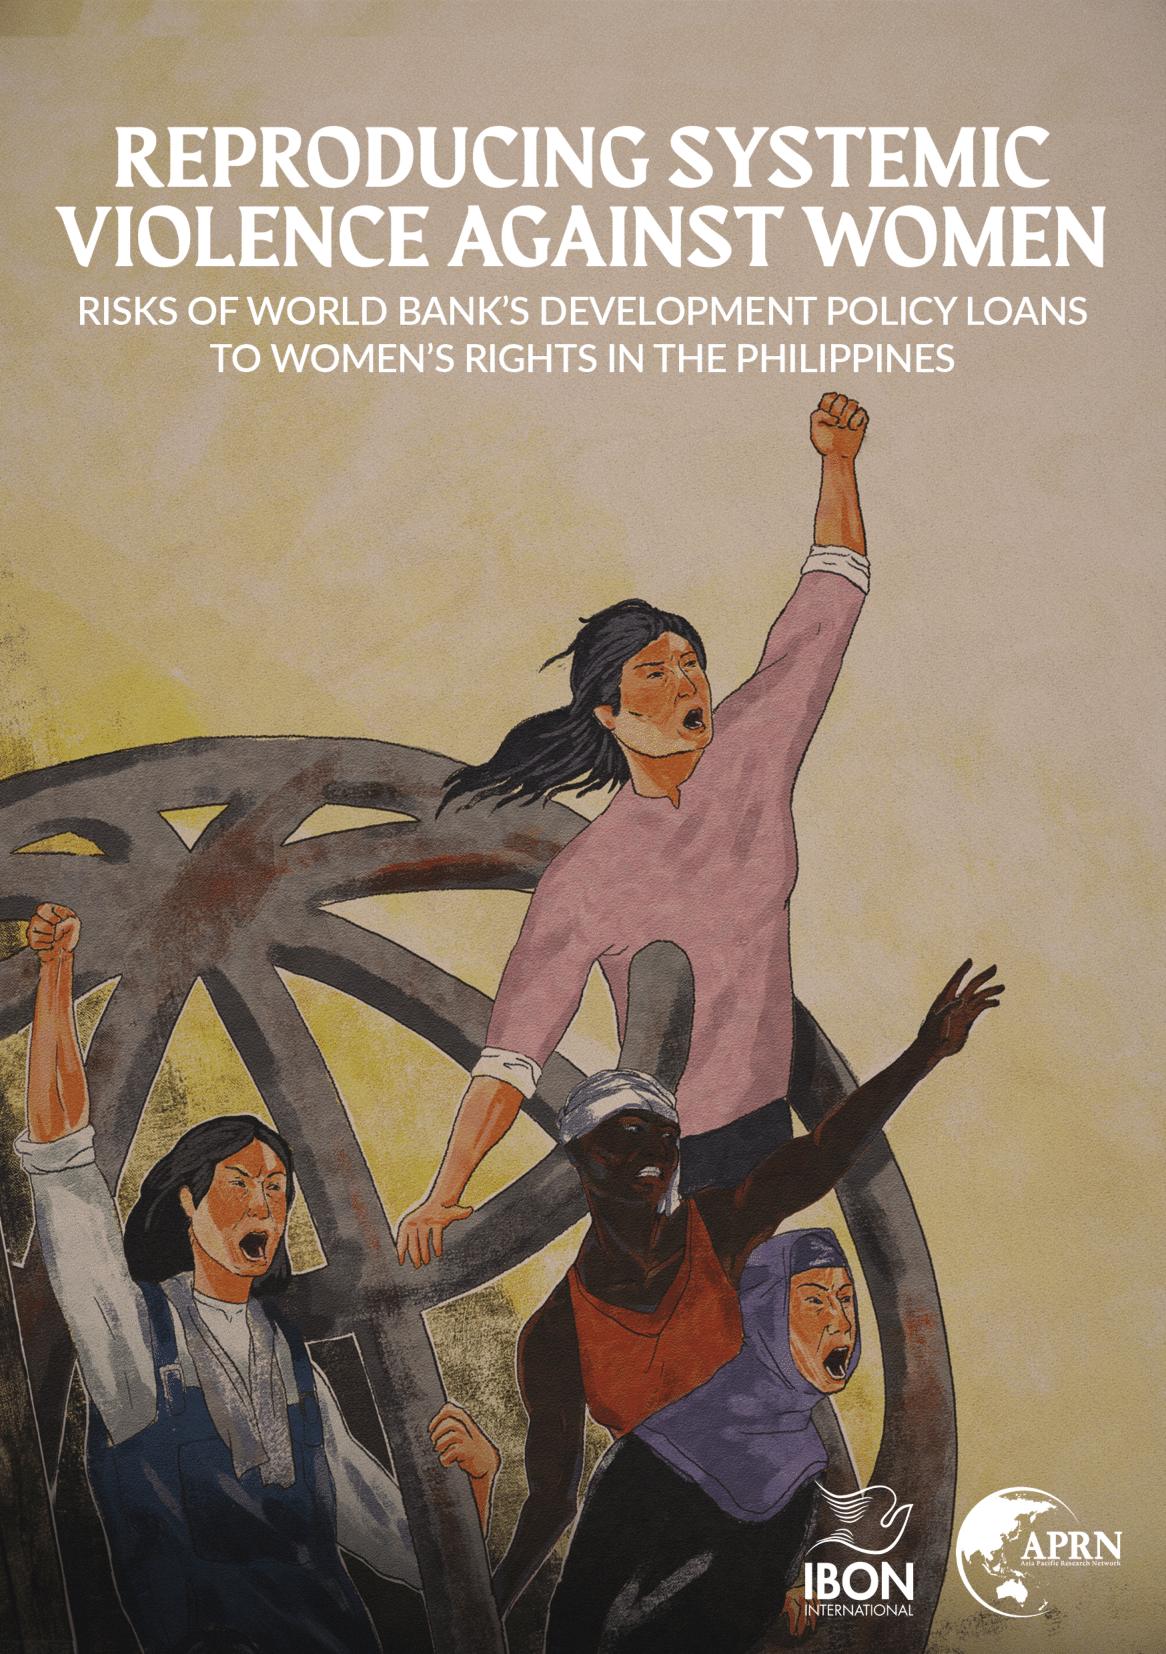 You are currently viewing Reproducing systemic violence against women: Risks of World Bank’s Development Policy Loans to women’s rights in the Philippines